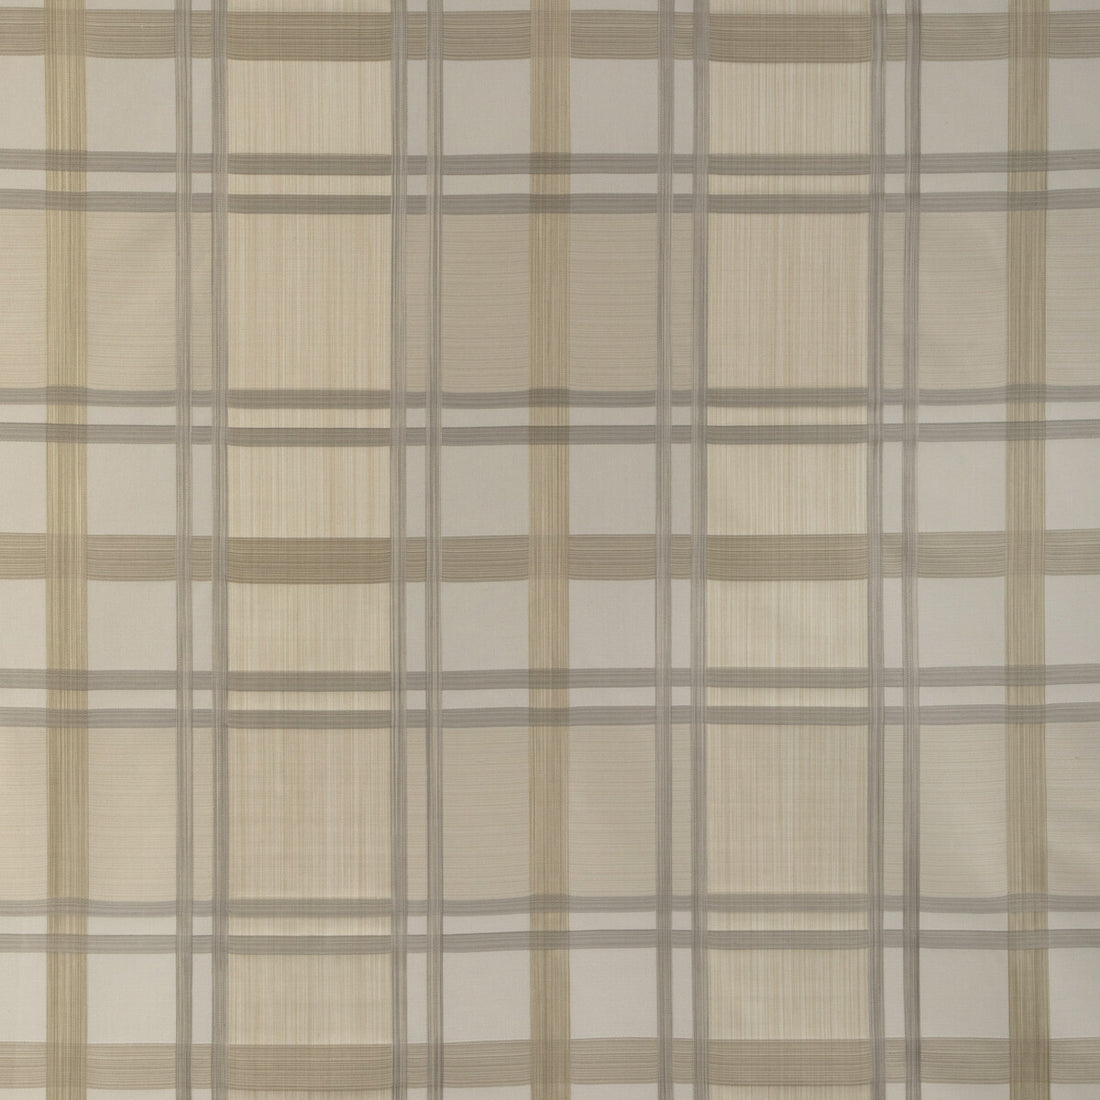 Davies Plaid fabric in sand/stone color - pattern 2023109.1611.0 - by Lee Jofa in the Highfield Stripes And Plaids collection